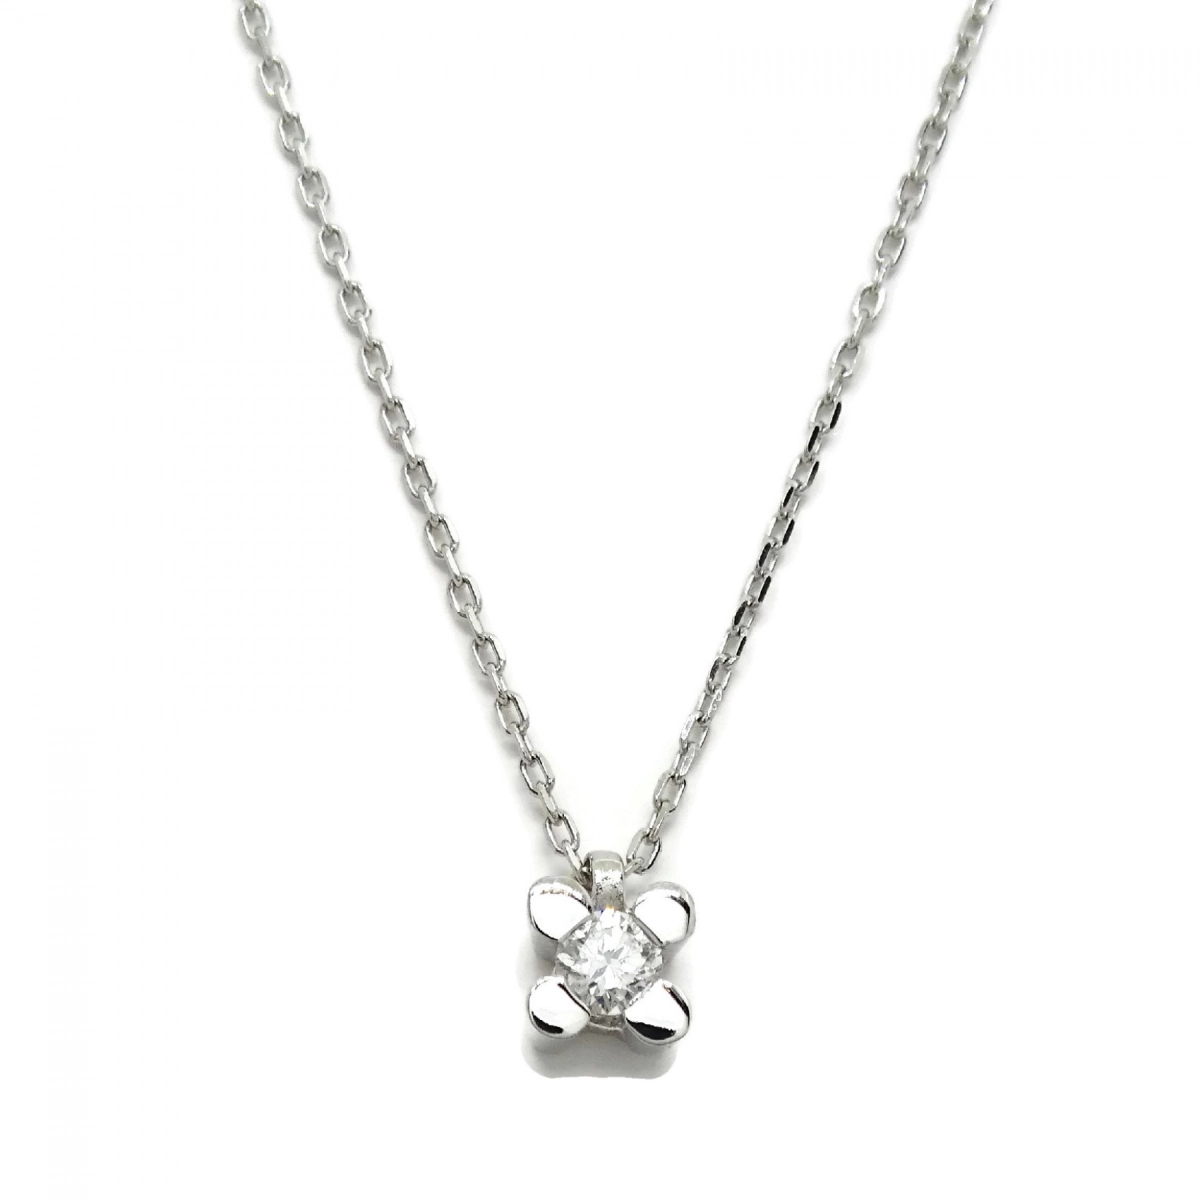 NEVER SAY NEVER NECKLACE WITH A DIAMOND OF 0.05 CTS AND WHITE GOLD 18KTES. 40CM